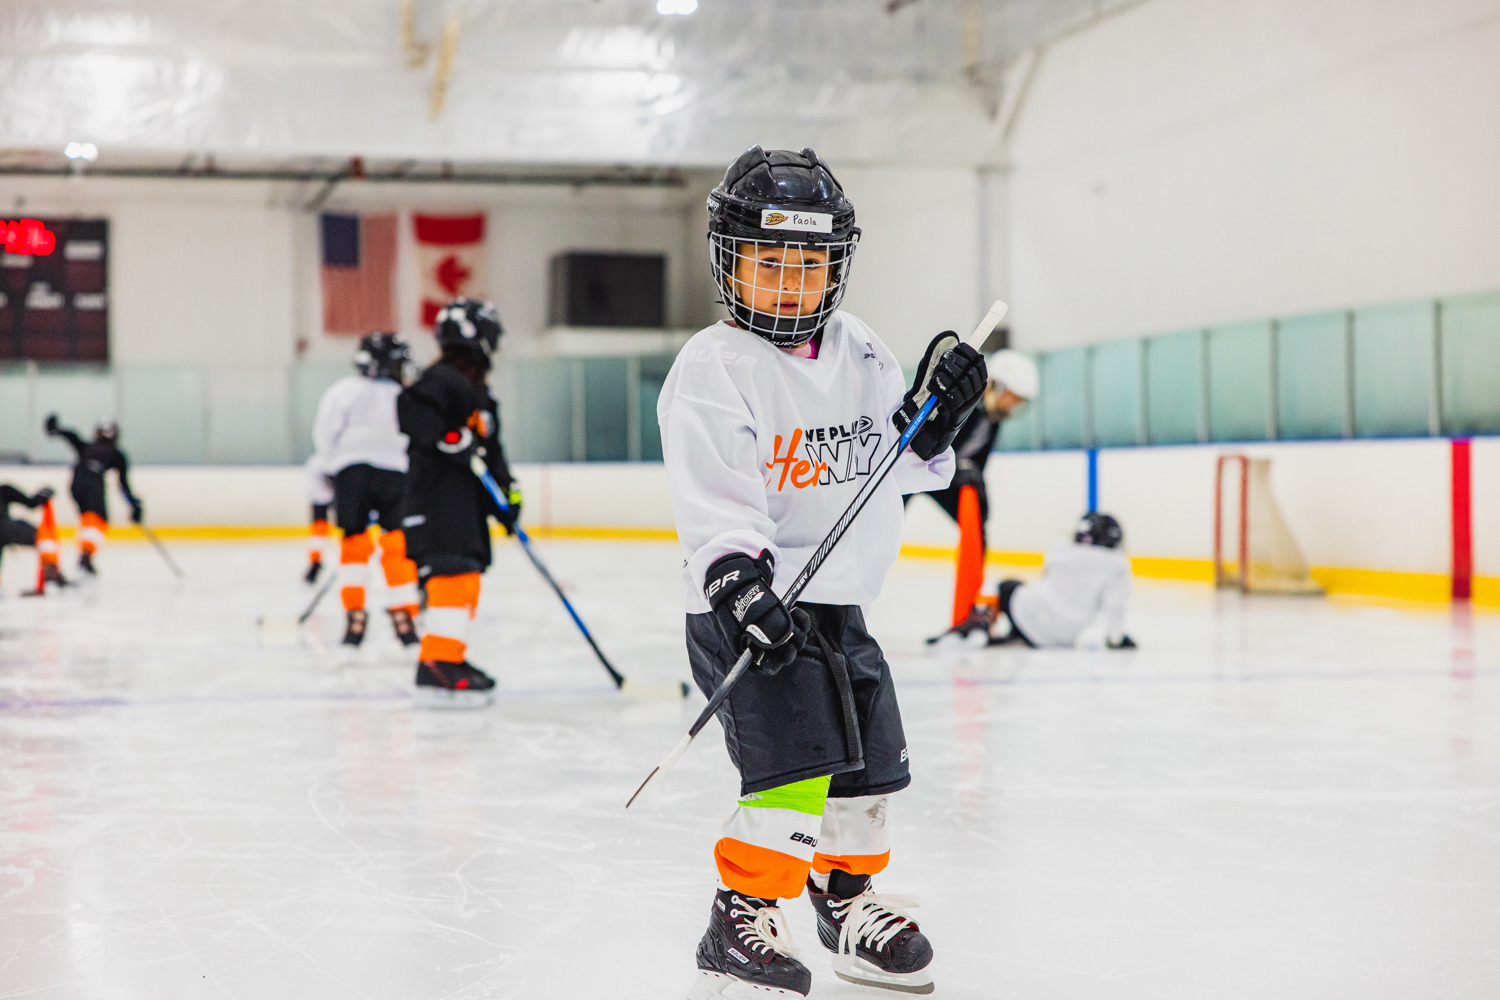 Young girl in hockey gear